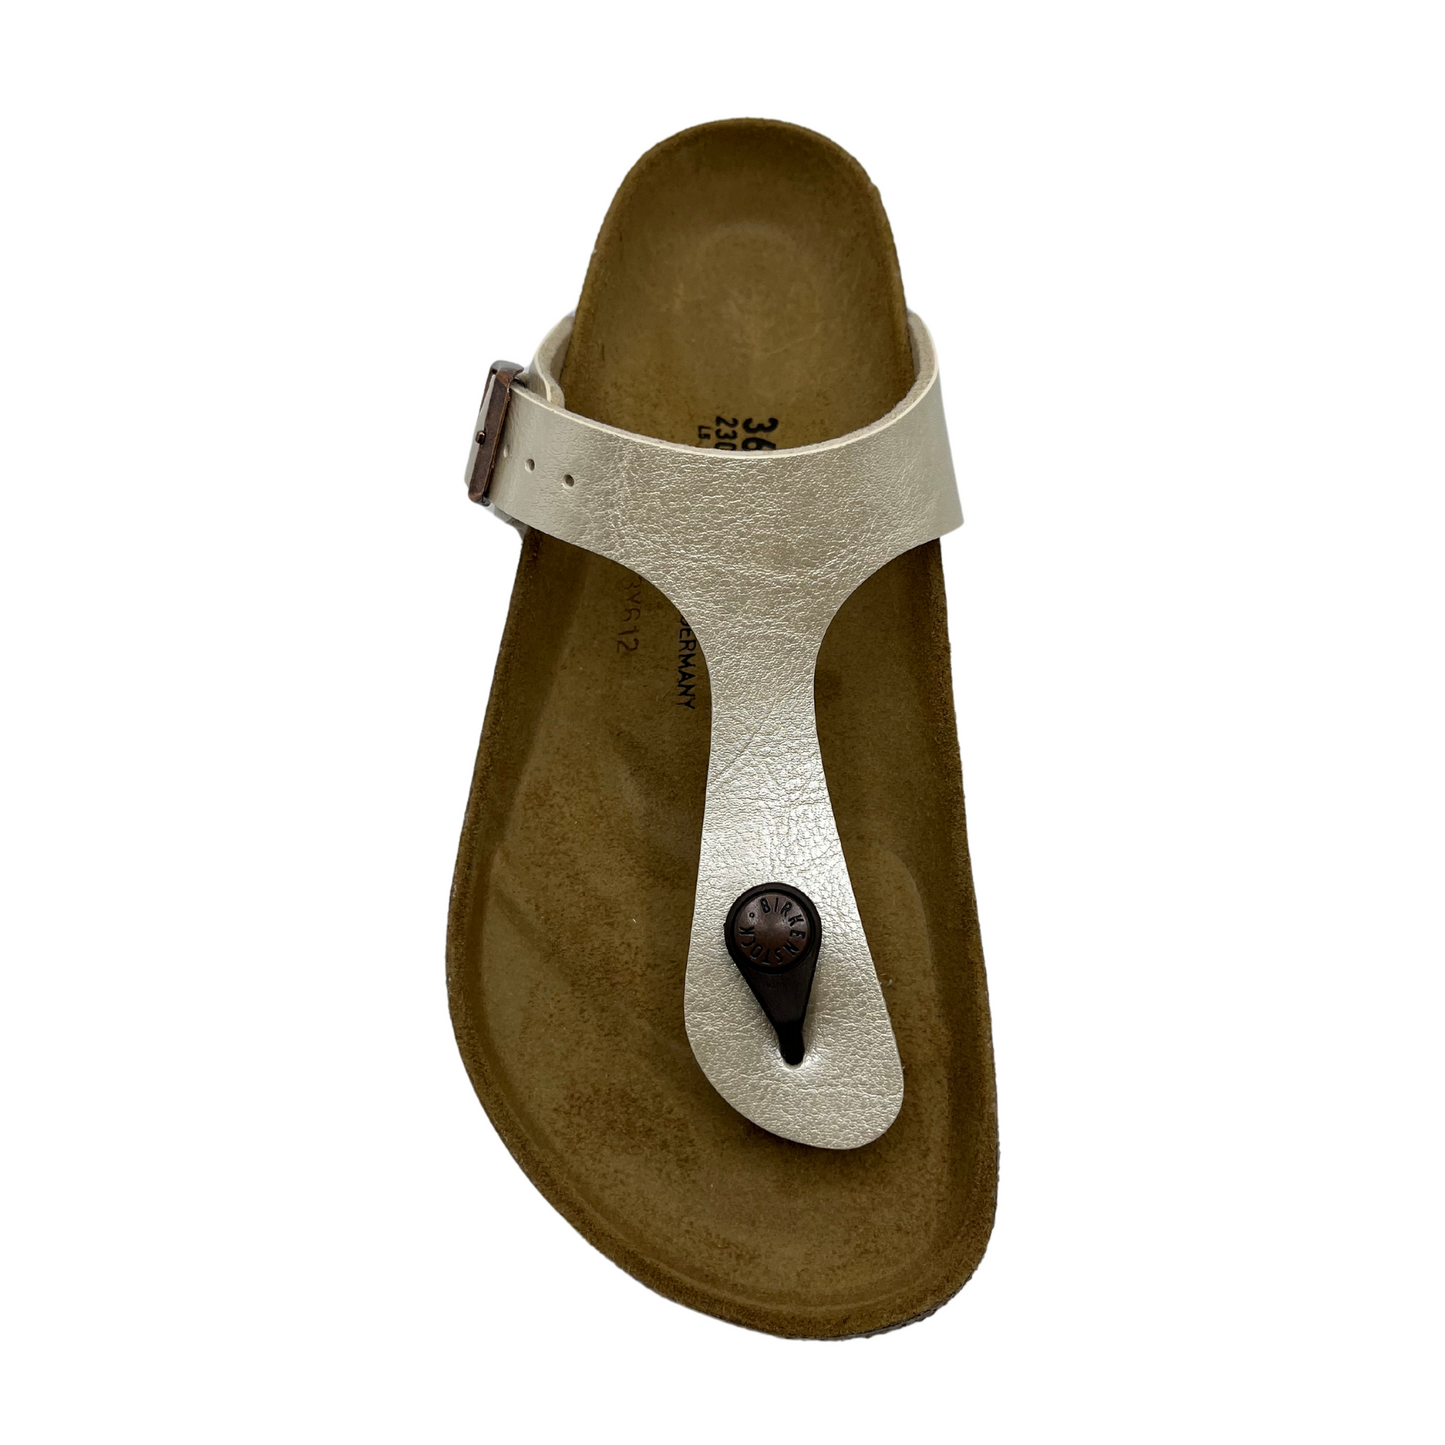 Top view of synthetic leather thong sandal with bronze buckle strap and suede lined contoured footbed.